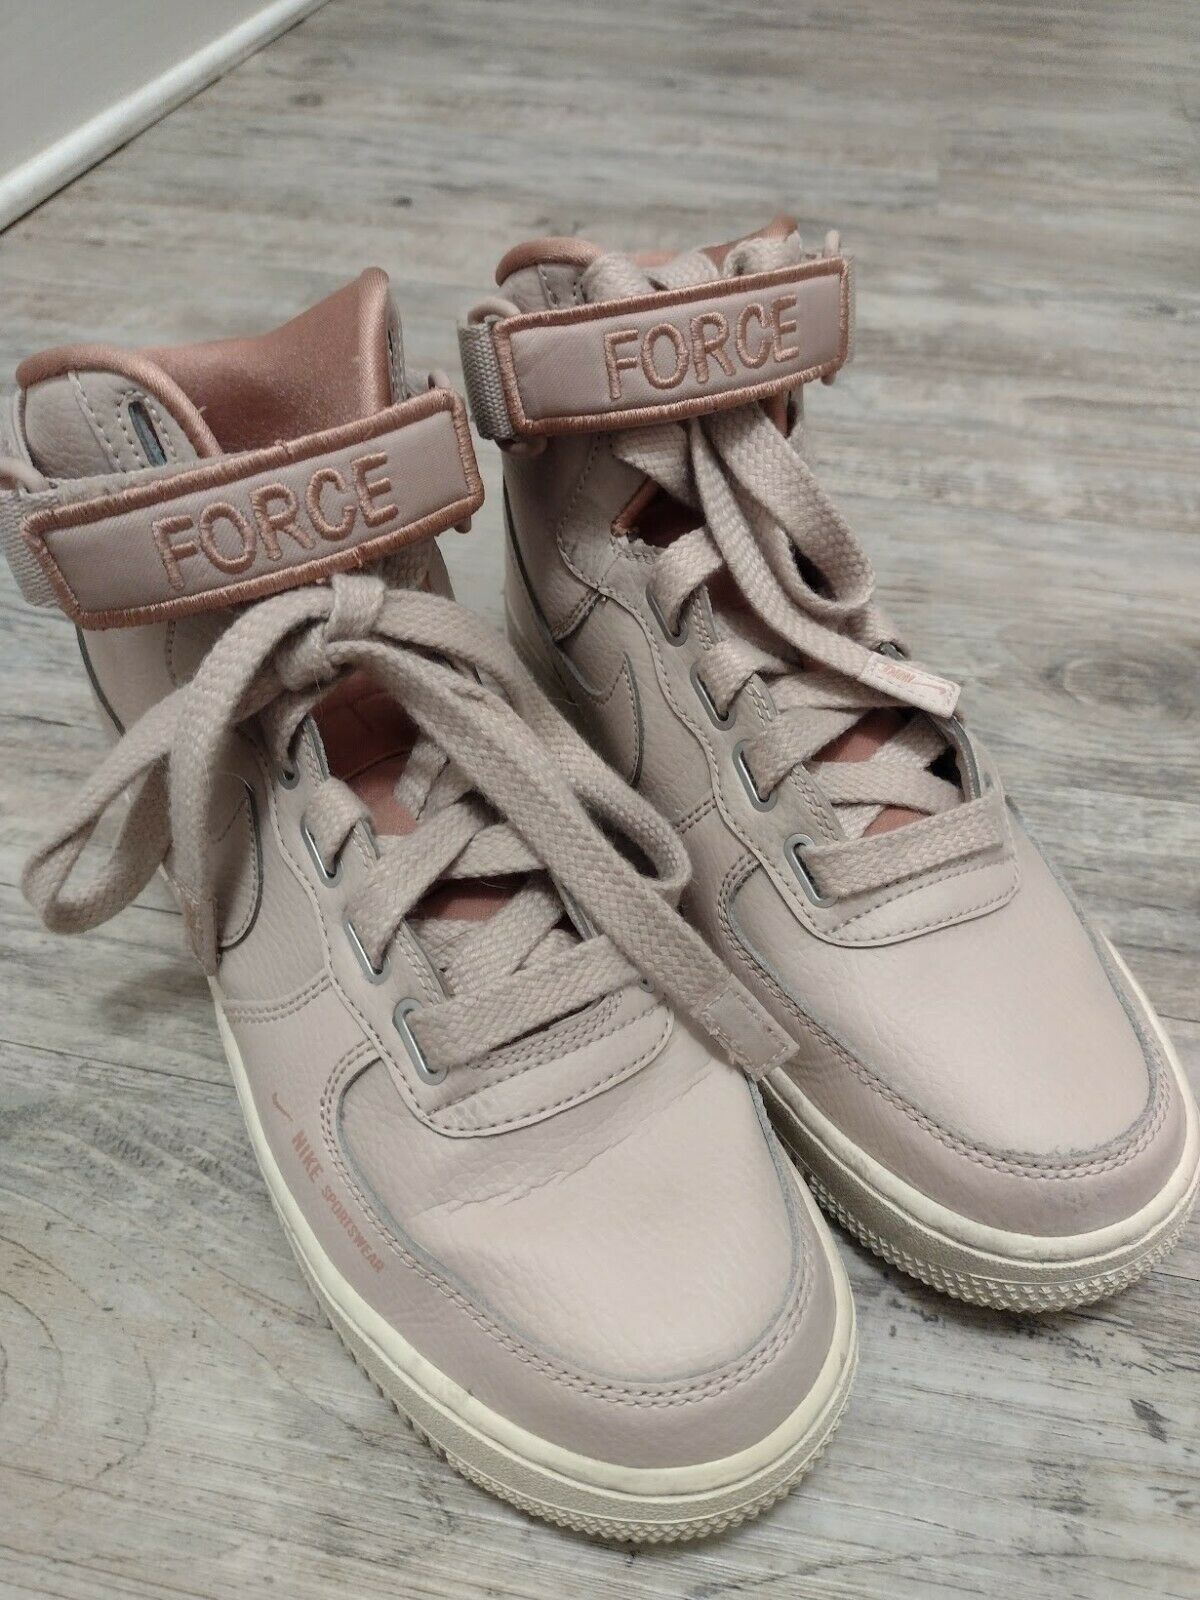 Nike Air Force 1 High Utility Women's US 8.5 High Top Sneaker Shoes Fossil Tan